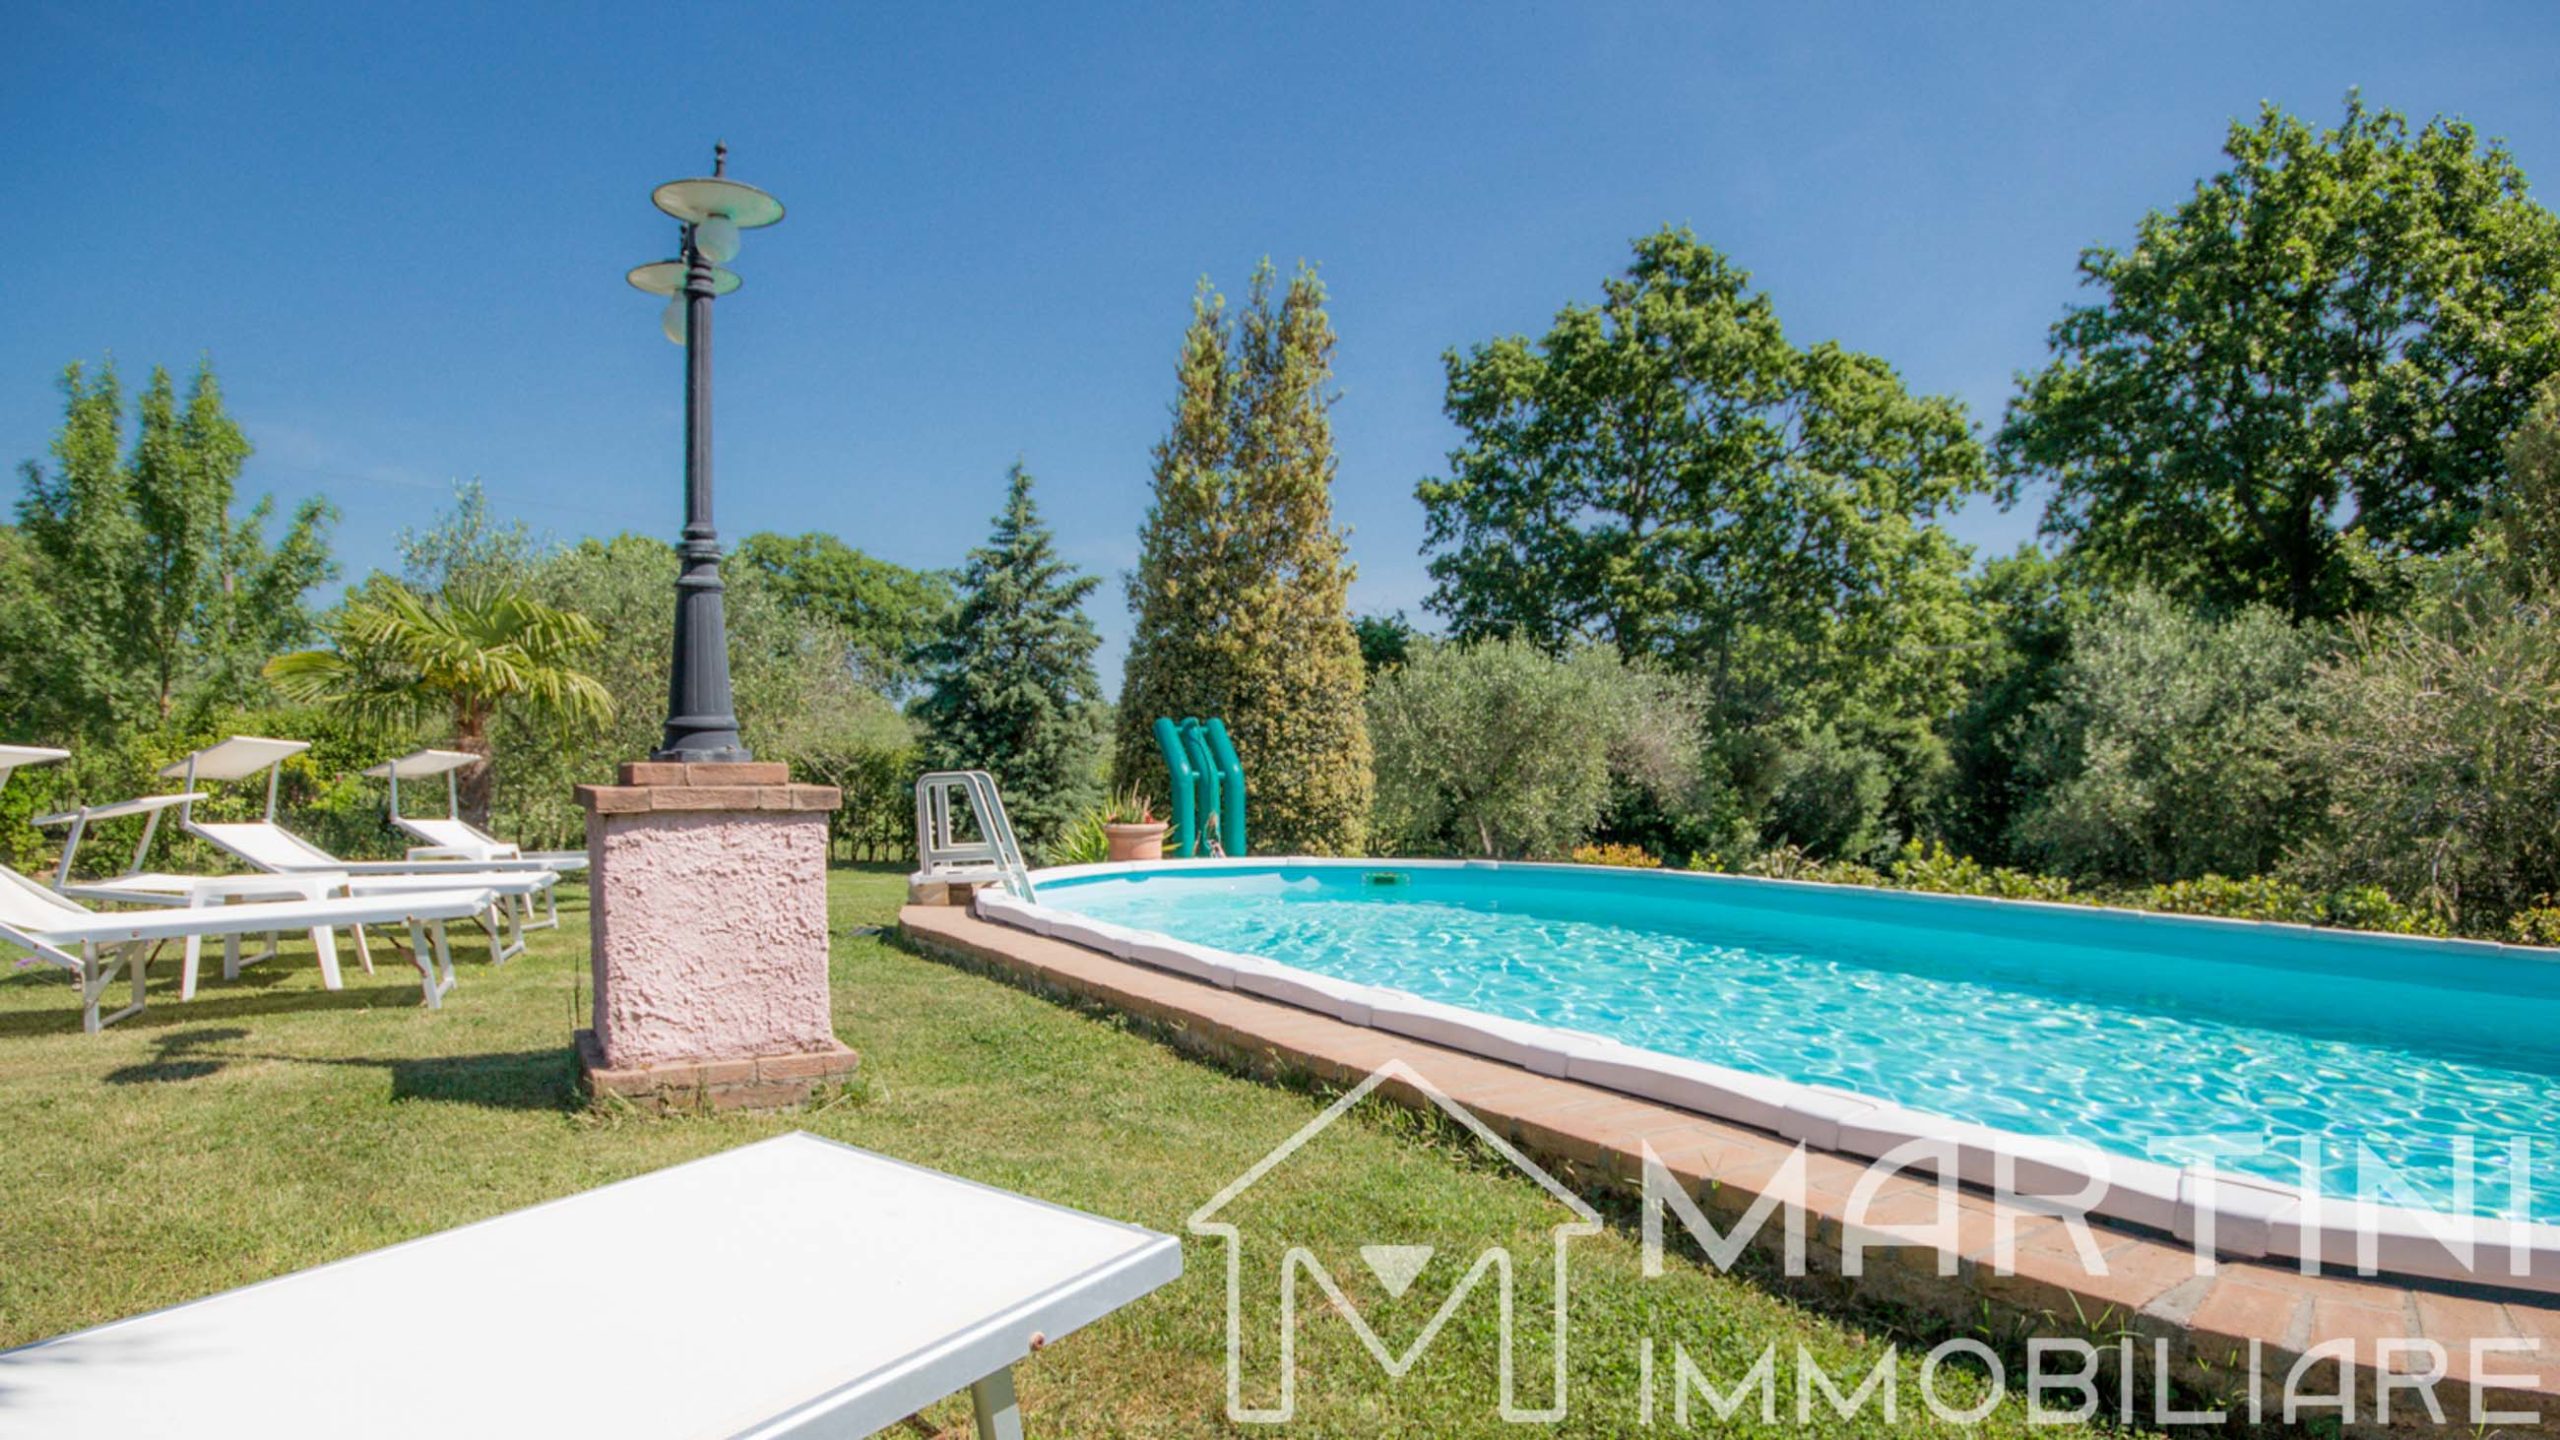 Apartment Rentals in Tuscany with Garden and Pool